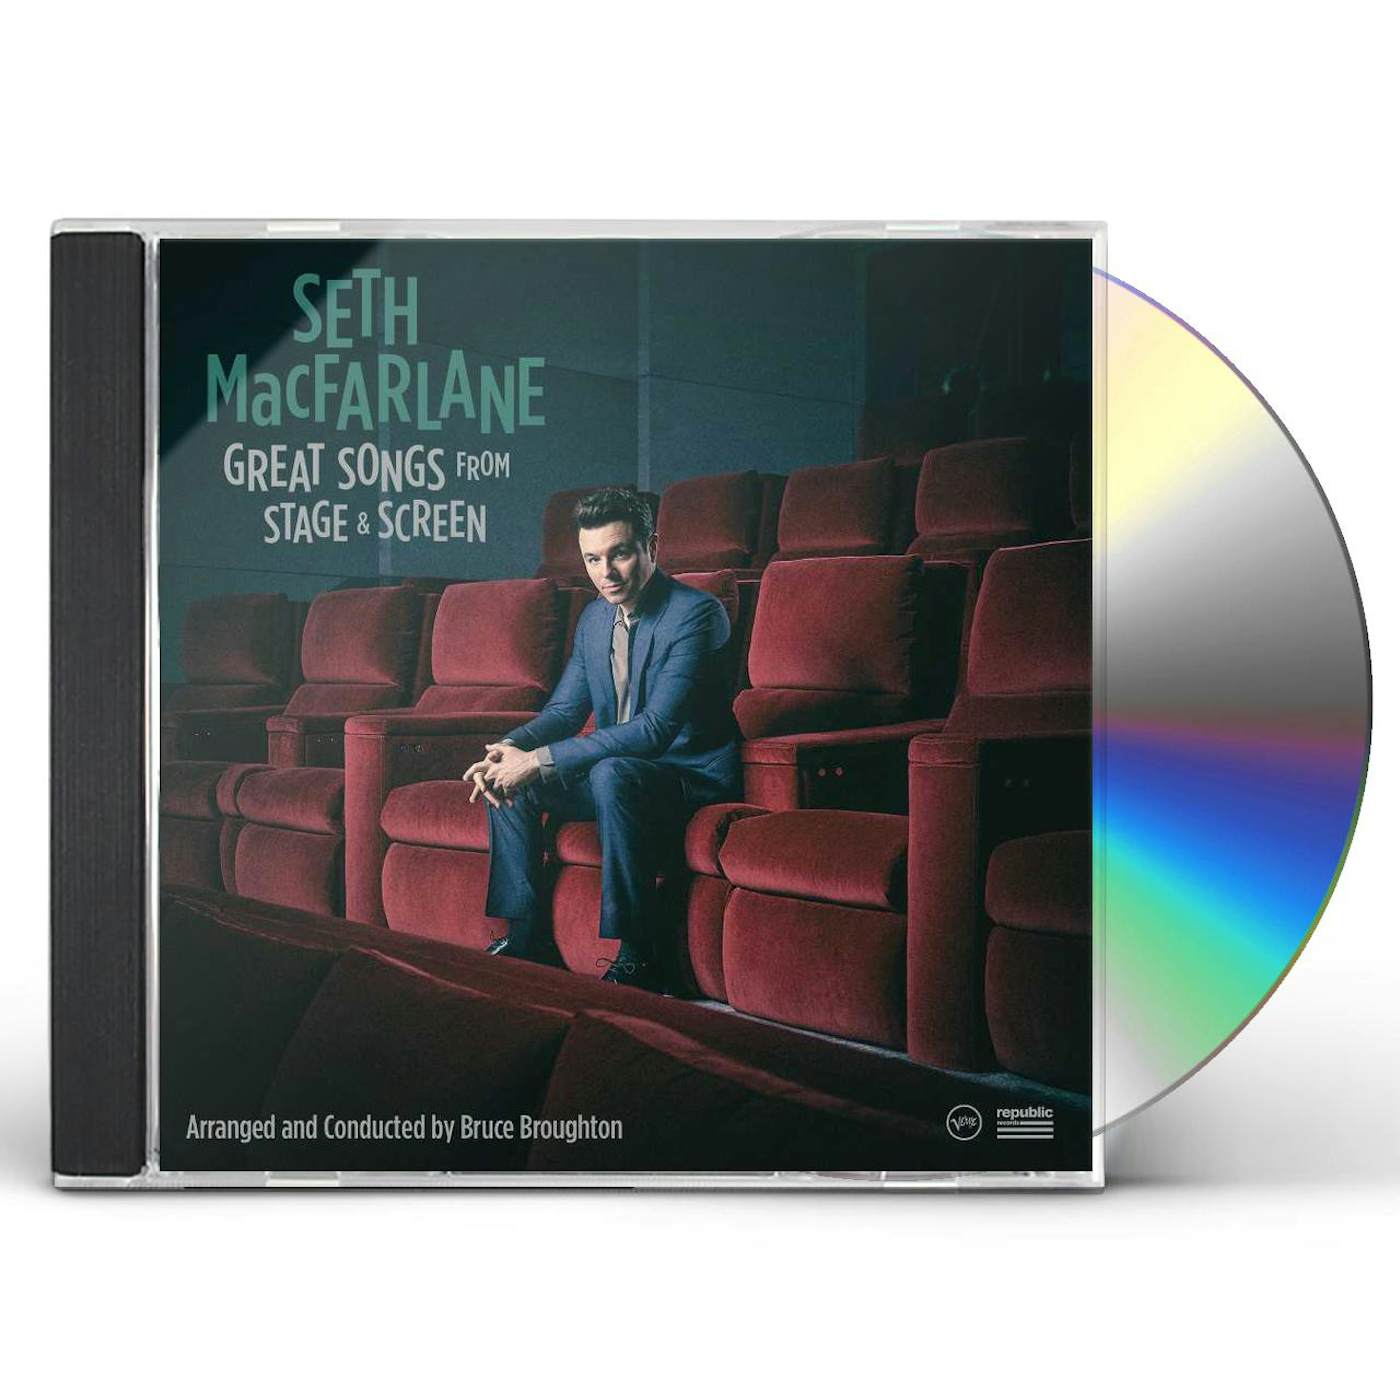 Seth MacFarlane GREAT SONGS FROM STAGE AND SCREEN CD